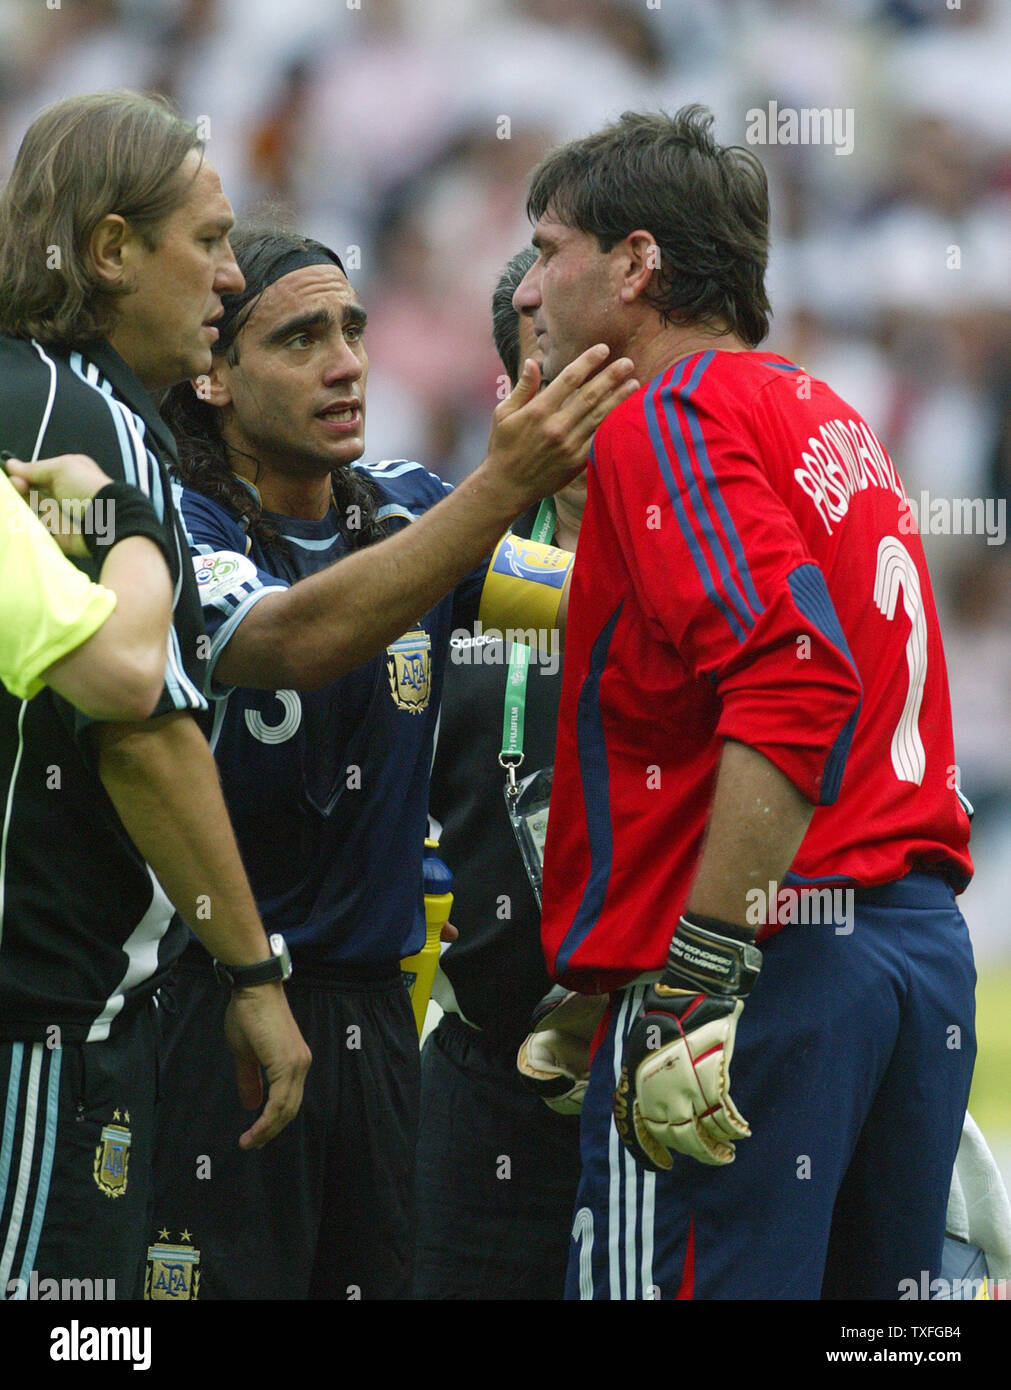 Argentina's goal keeper Roberto Abbondanzieri  is remontivated by his team players to continue but had to resign soon afterwards due to injury during World Cup soccer at Olympiastadion on Friday, June 30, 2006 in Berlin, Germany. Germany defeated Argentina 4-2.   (UPI Photo/Arthur Thill) Stock Photo